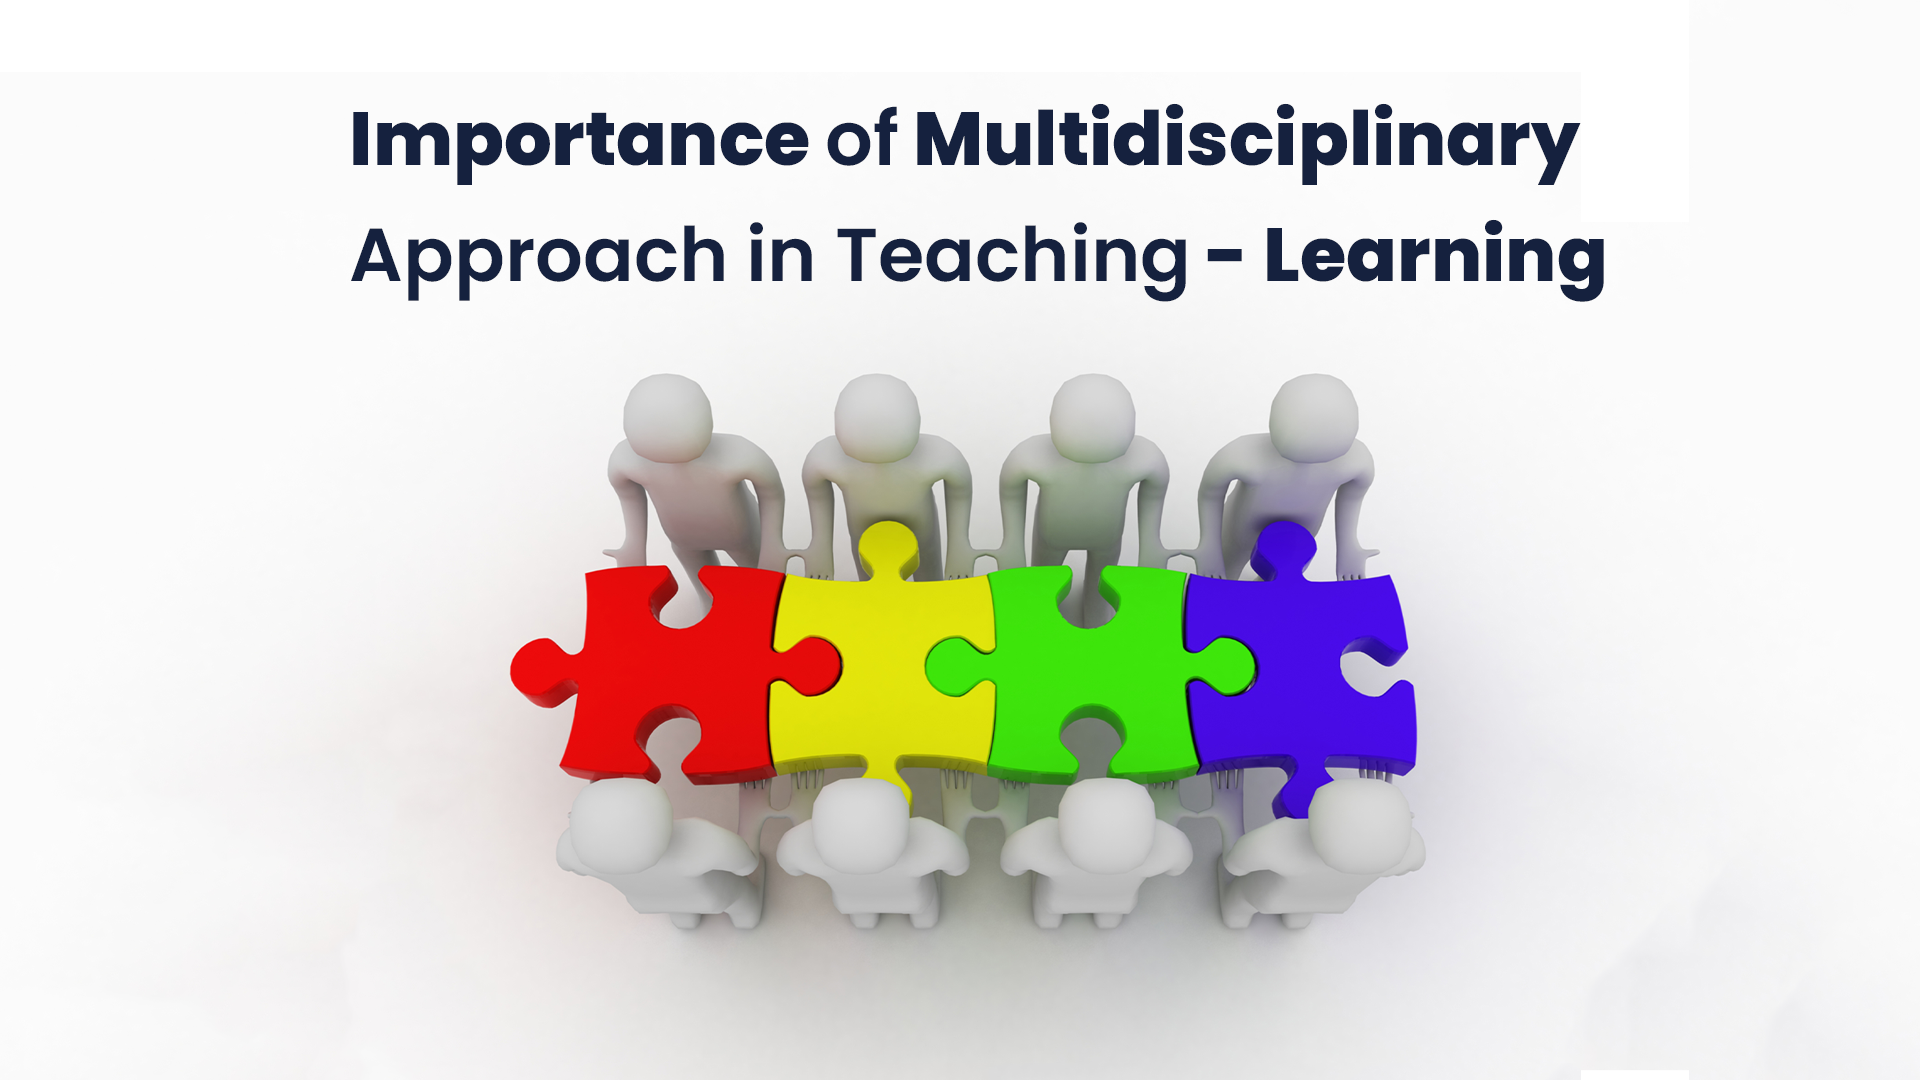 Importance of Multidisciplinary Approach in Teaching - Learning